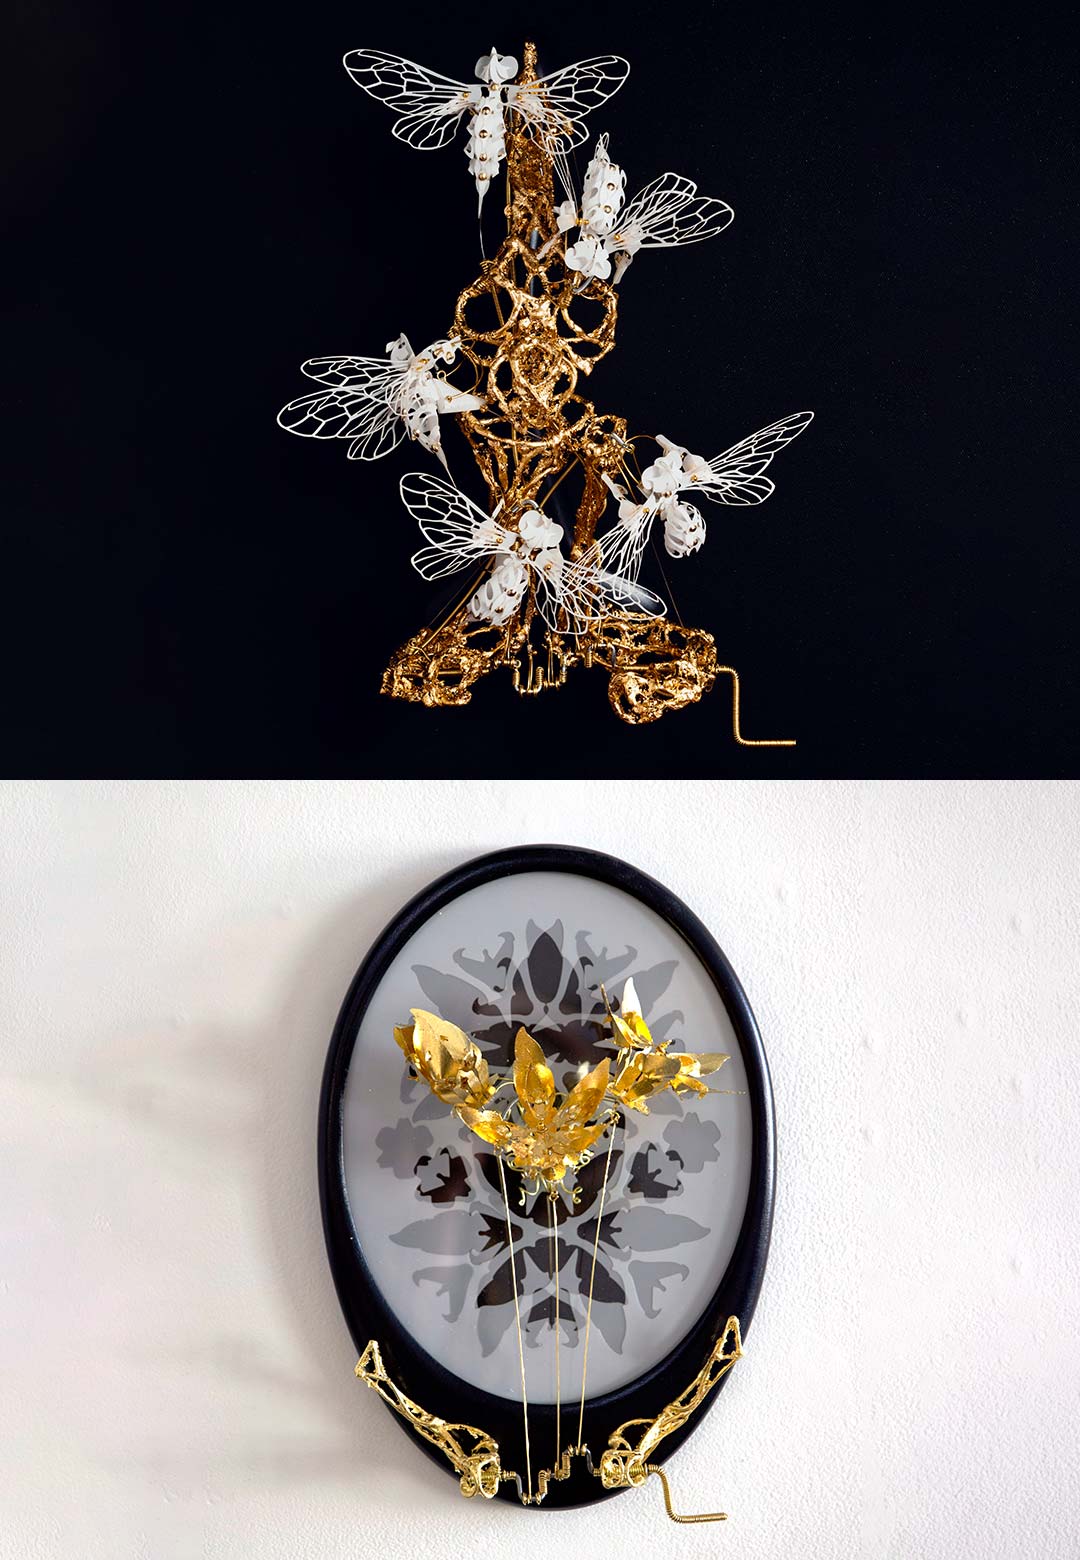 Carrion Blooms: Casey Curran crafts sculptures that blossom and flutter to life